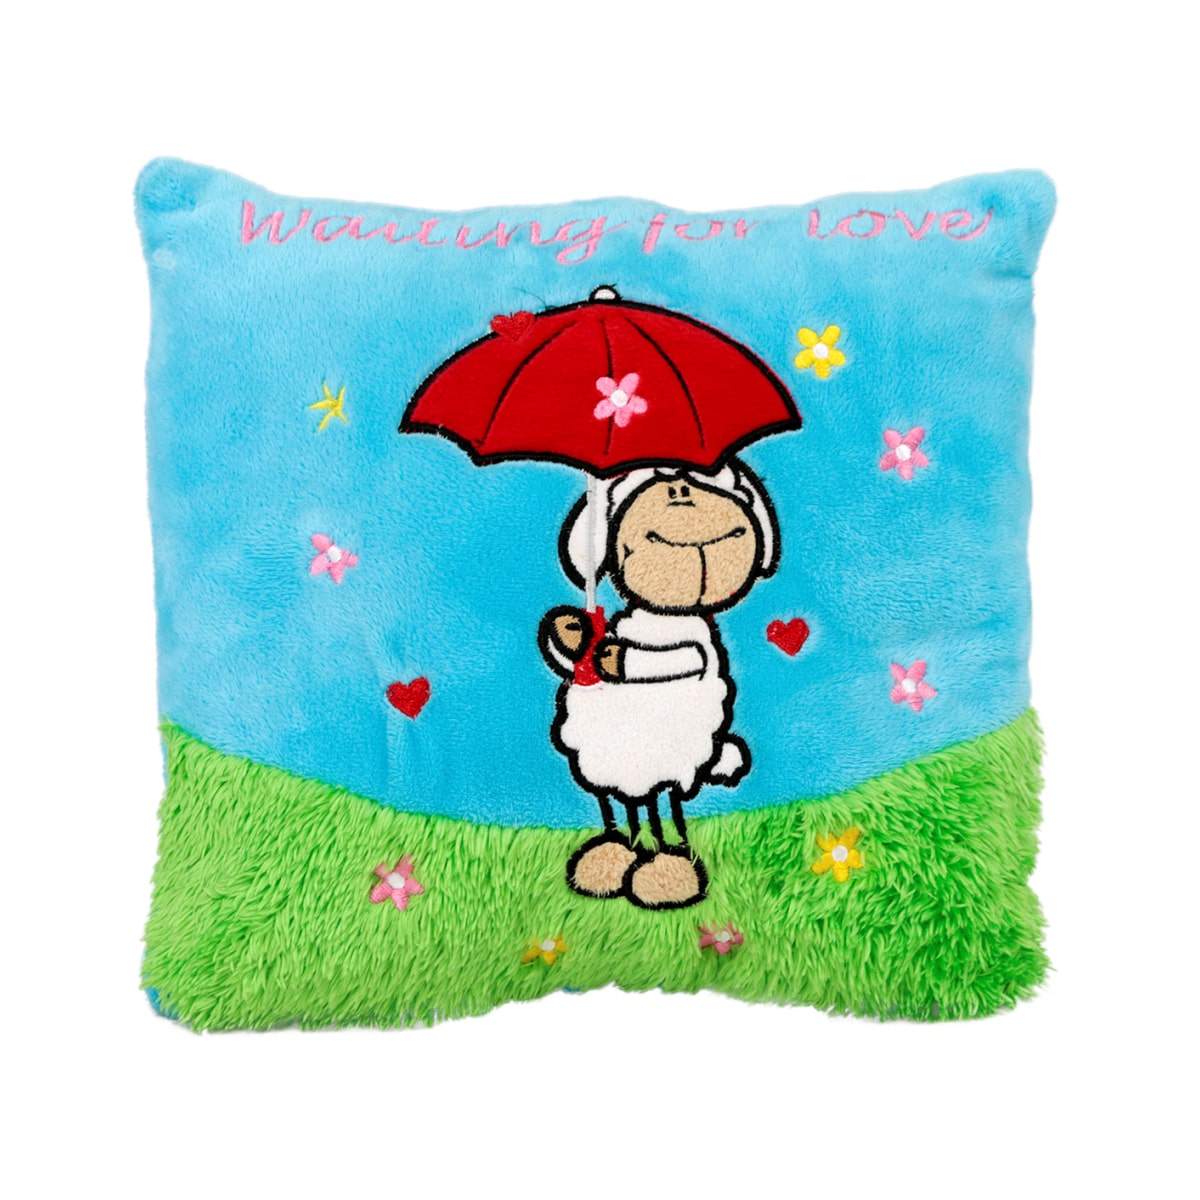 Pillow with sheep